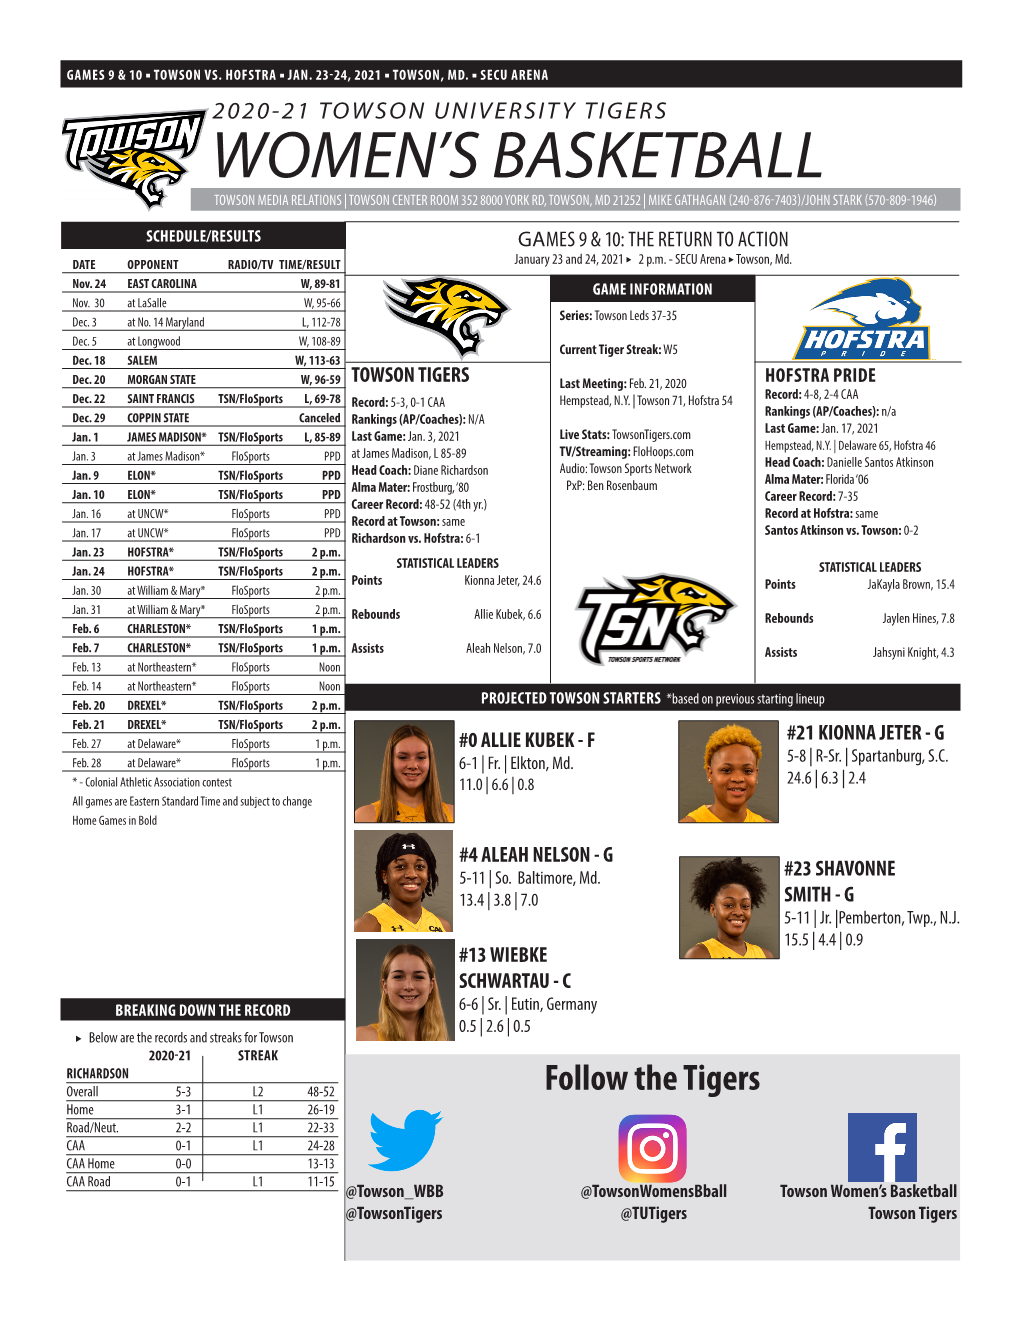 Women's Basketball Page 1/1 Combined Team Statistics As of Jan 04, 2021 All Games